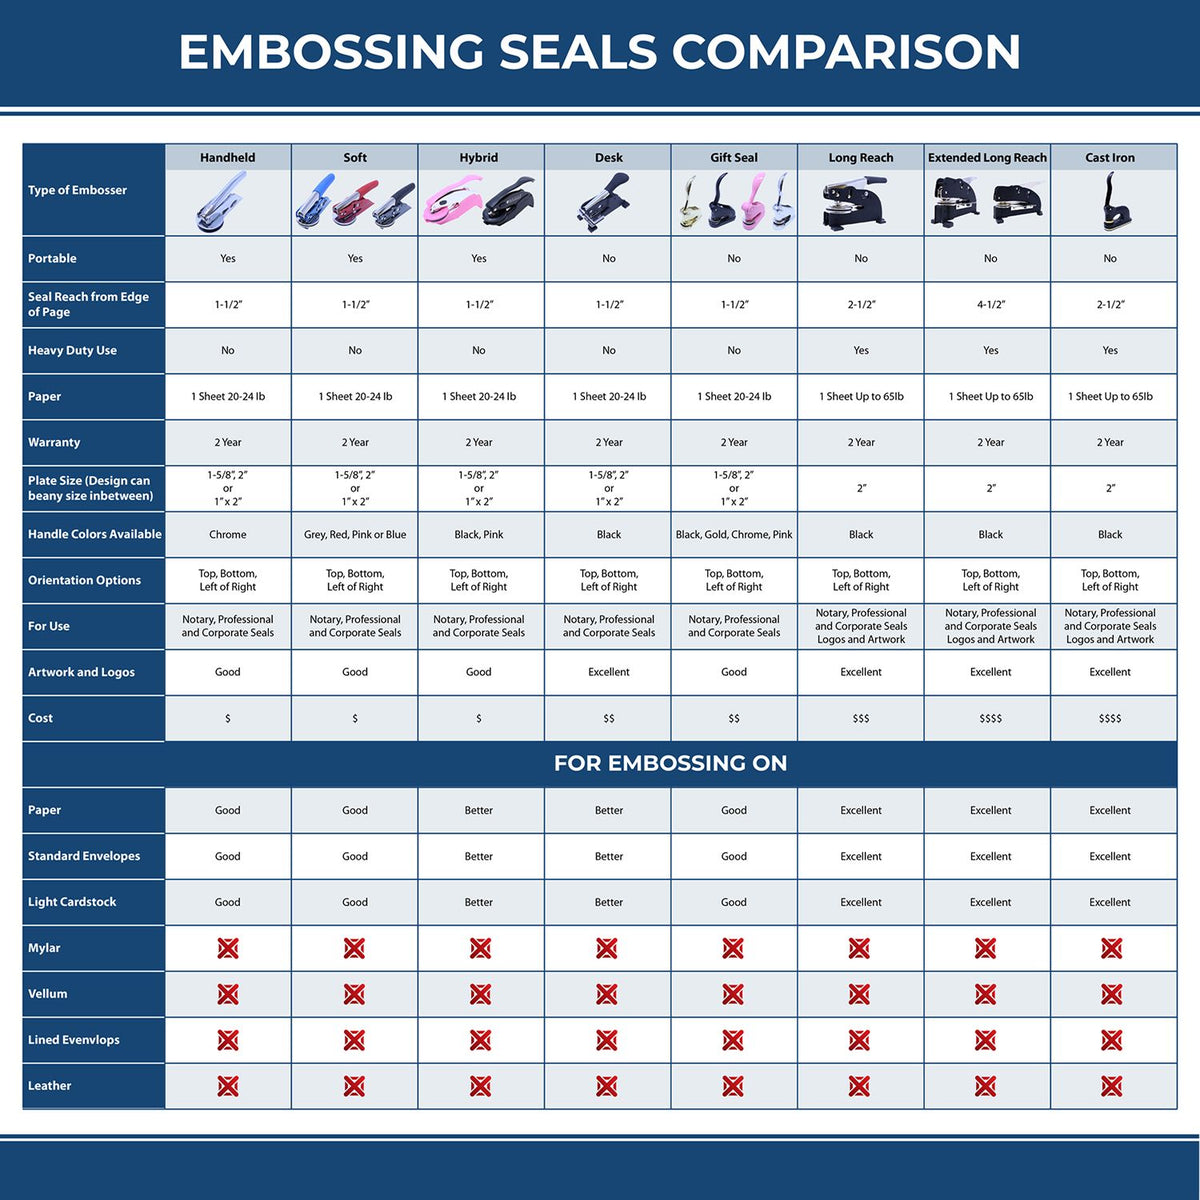 A comparison chart for the different types of mount models available for the State of Missouri Long Reach Architectural Embossing Seal.